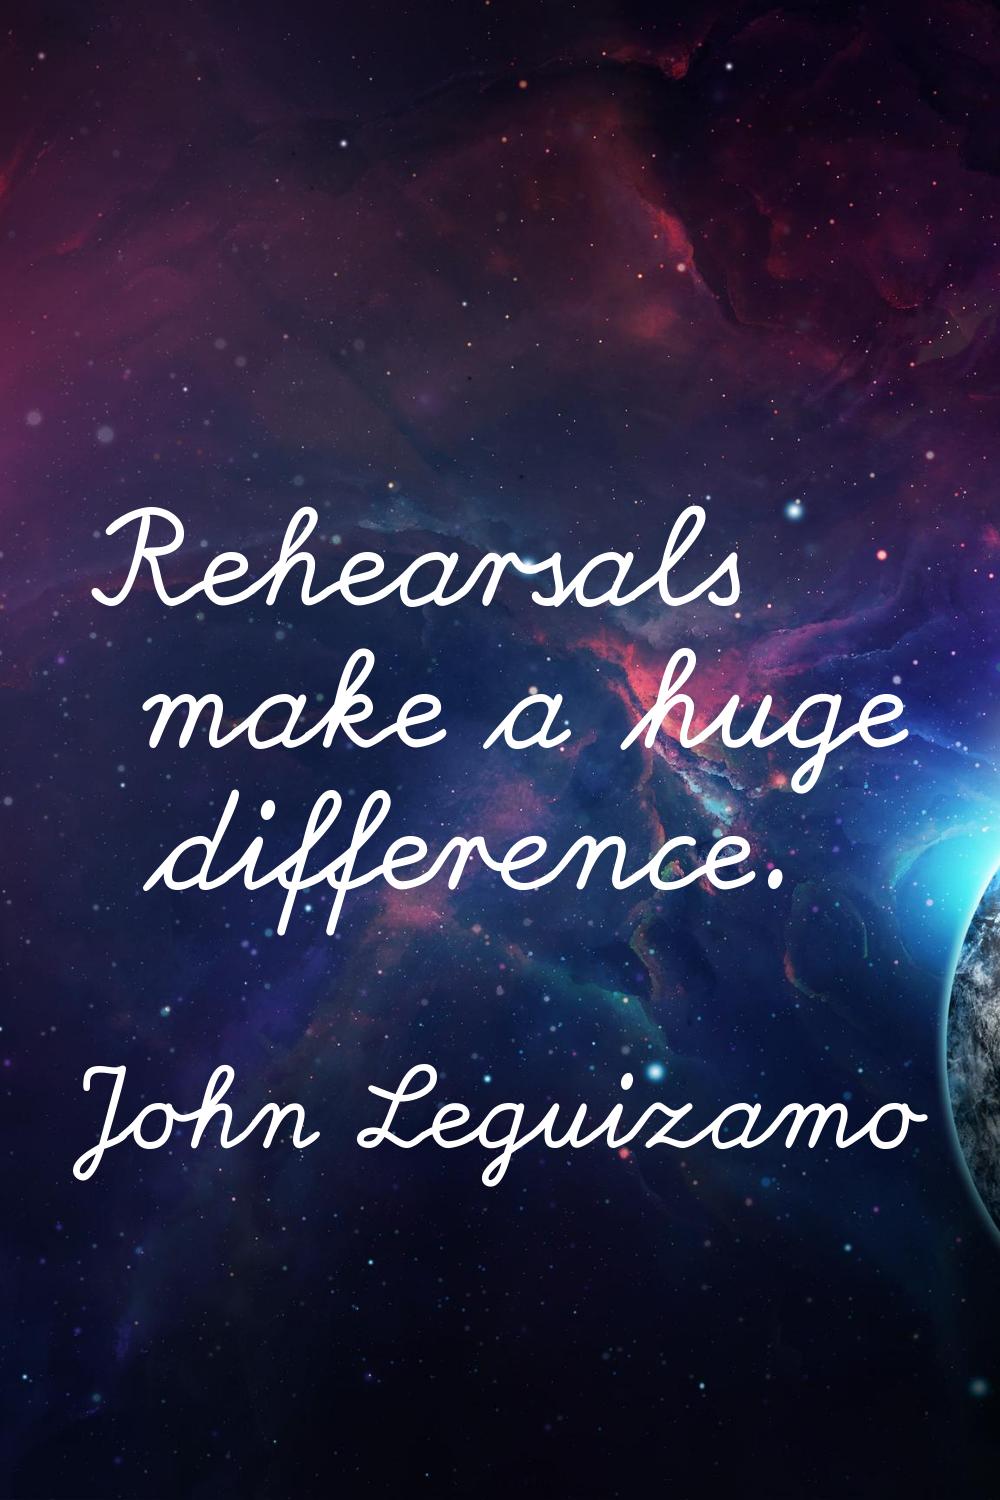 Rehearsals make a huge difference.